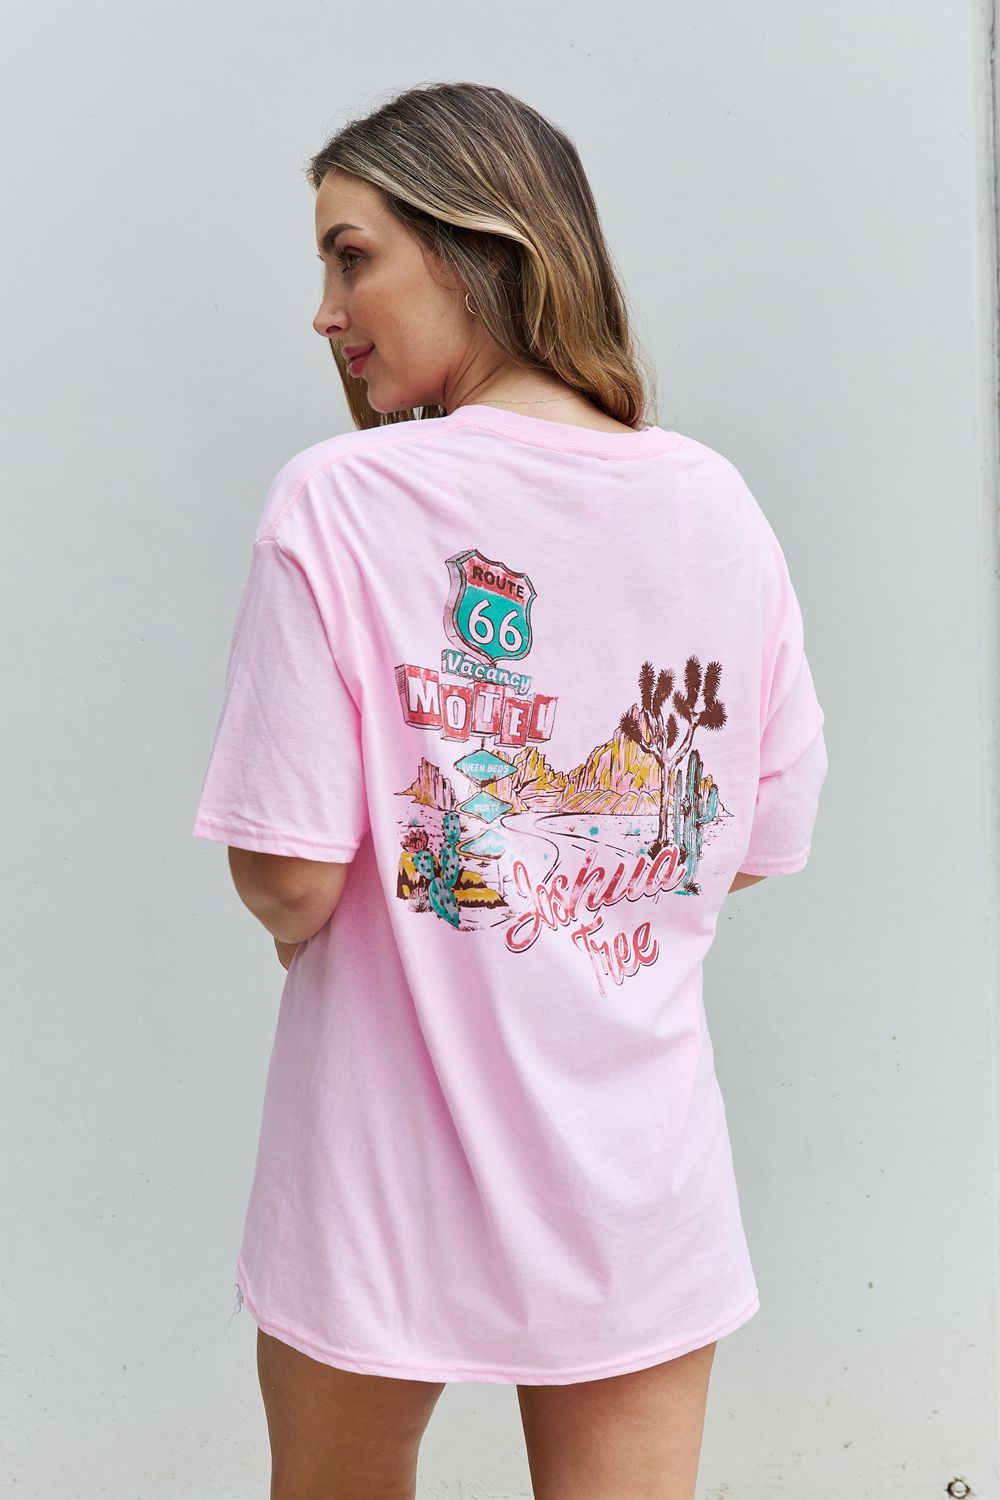 Sweet Claire "Wish You Were Here" Oversized Graphic T-Shirt Sweet Claire